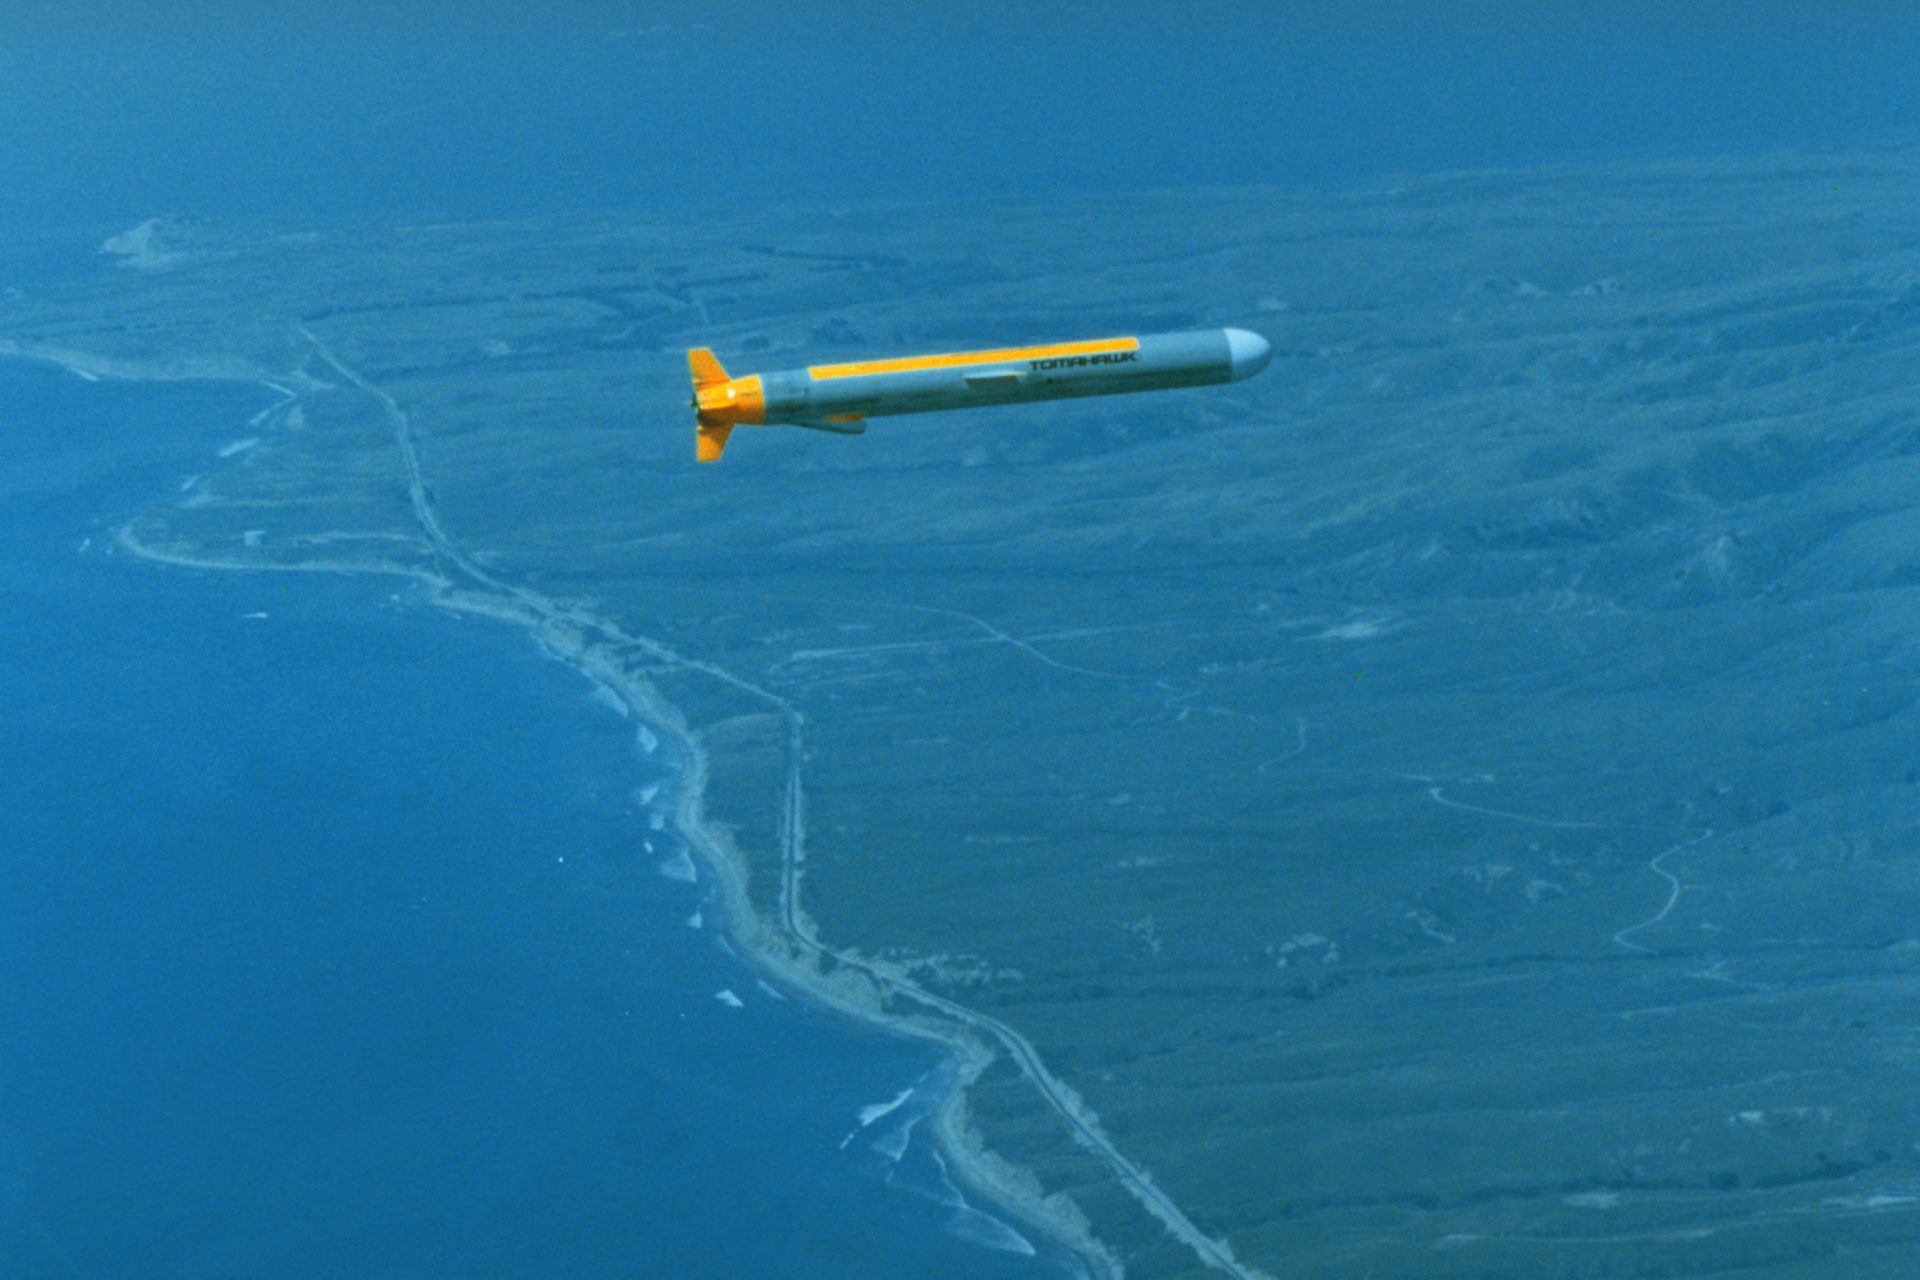 The Tomahawk Land Attack Missile